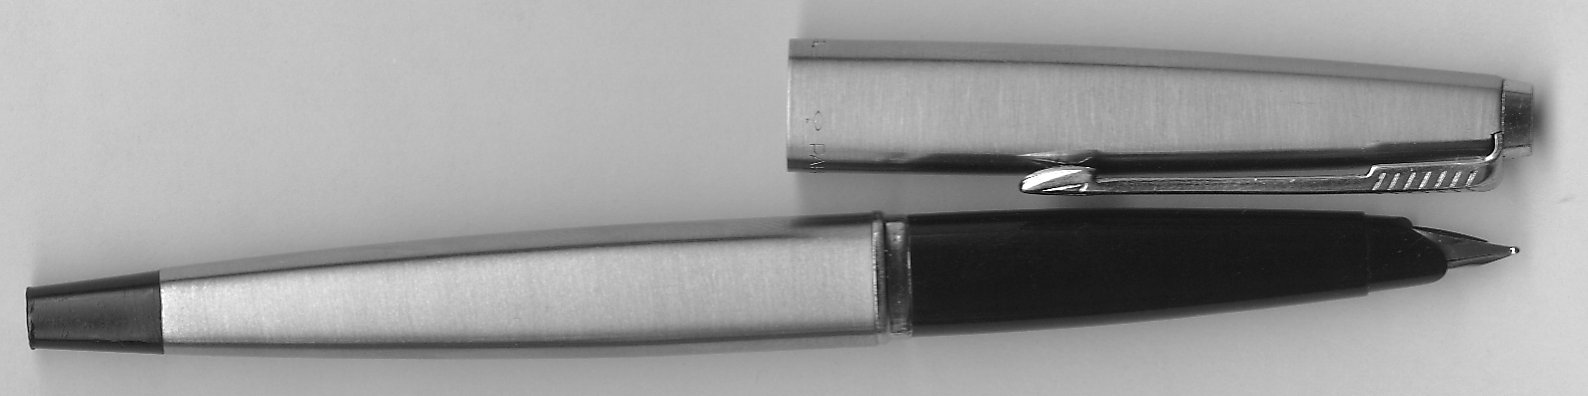 PARKER 45 JOTTER PEN N° C 2831 WITH CERTIFICATE AND CV BOX